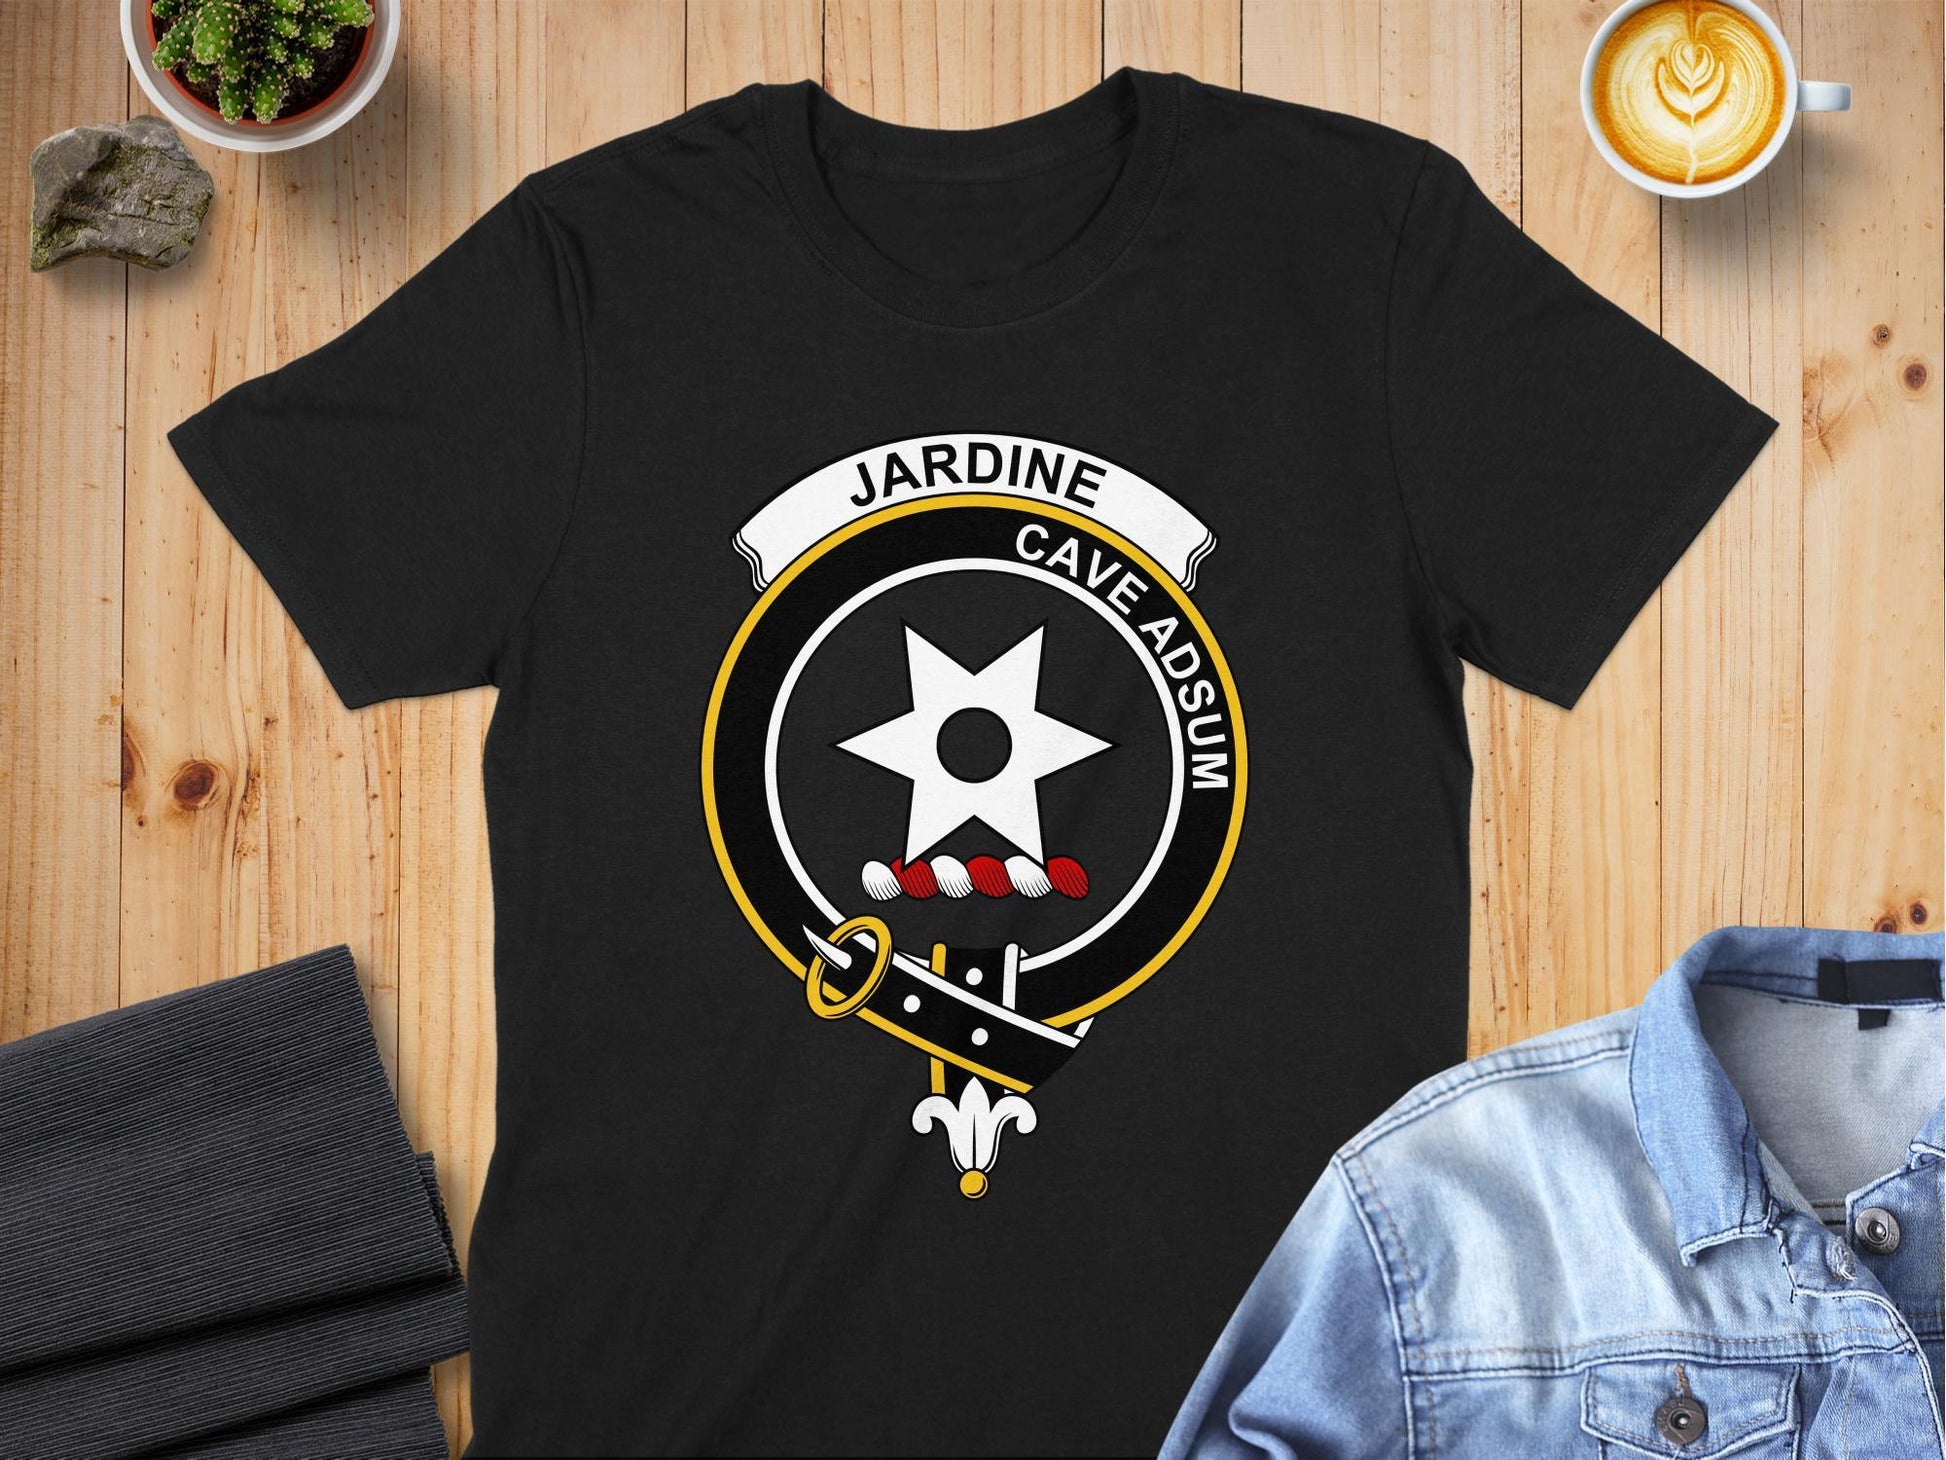 Scottish Clan Crest T-Shirt with Jardine Family Emblem - Living Stone Gifts